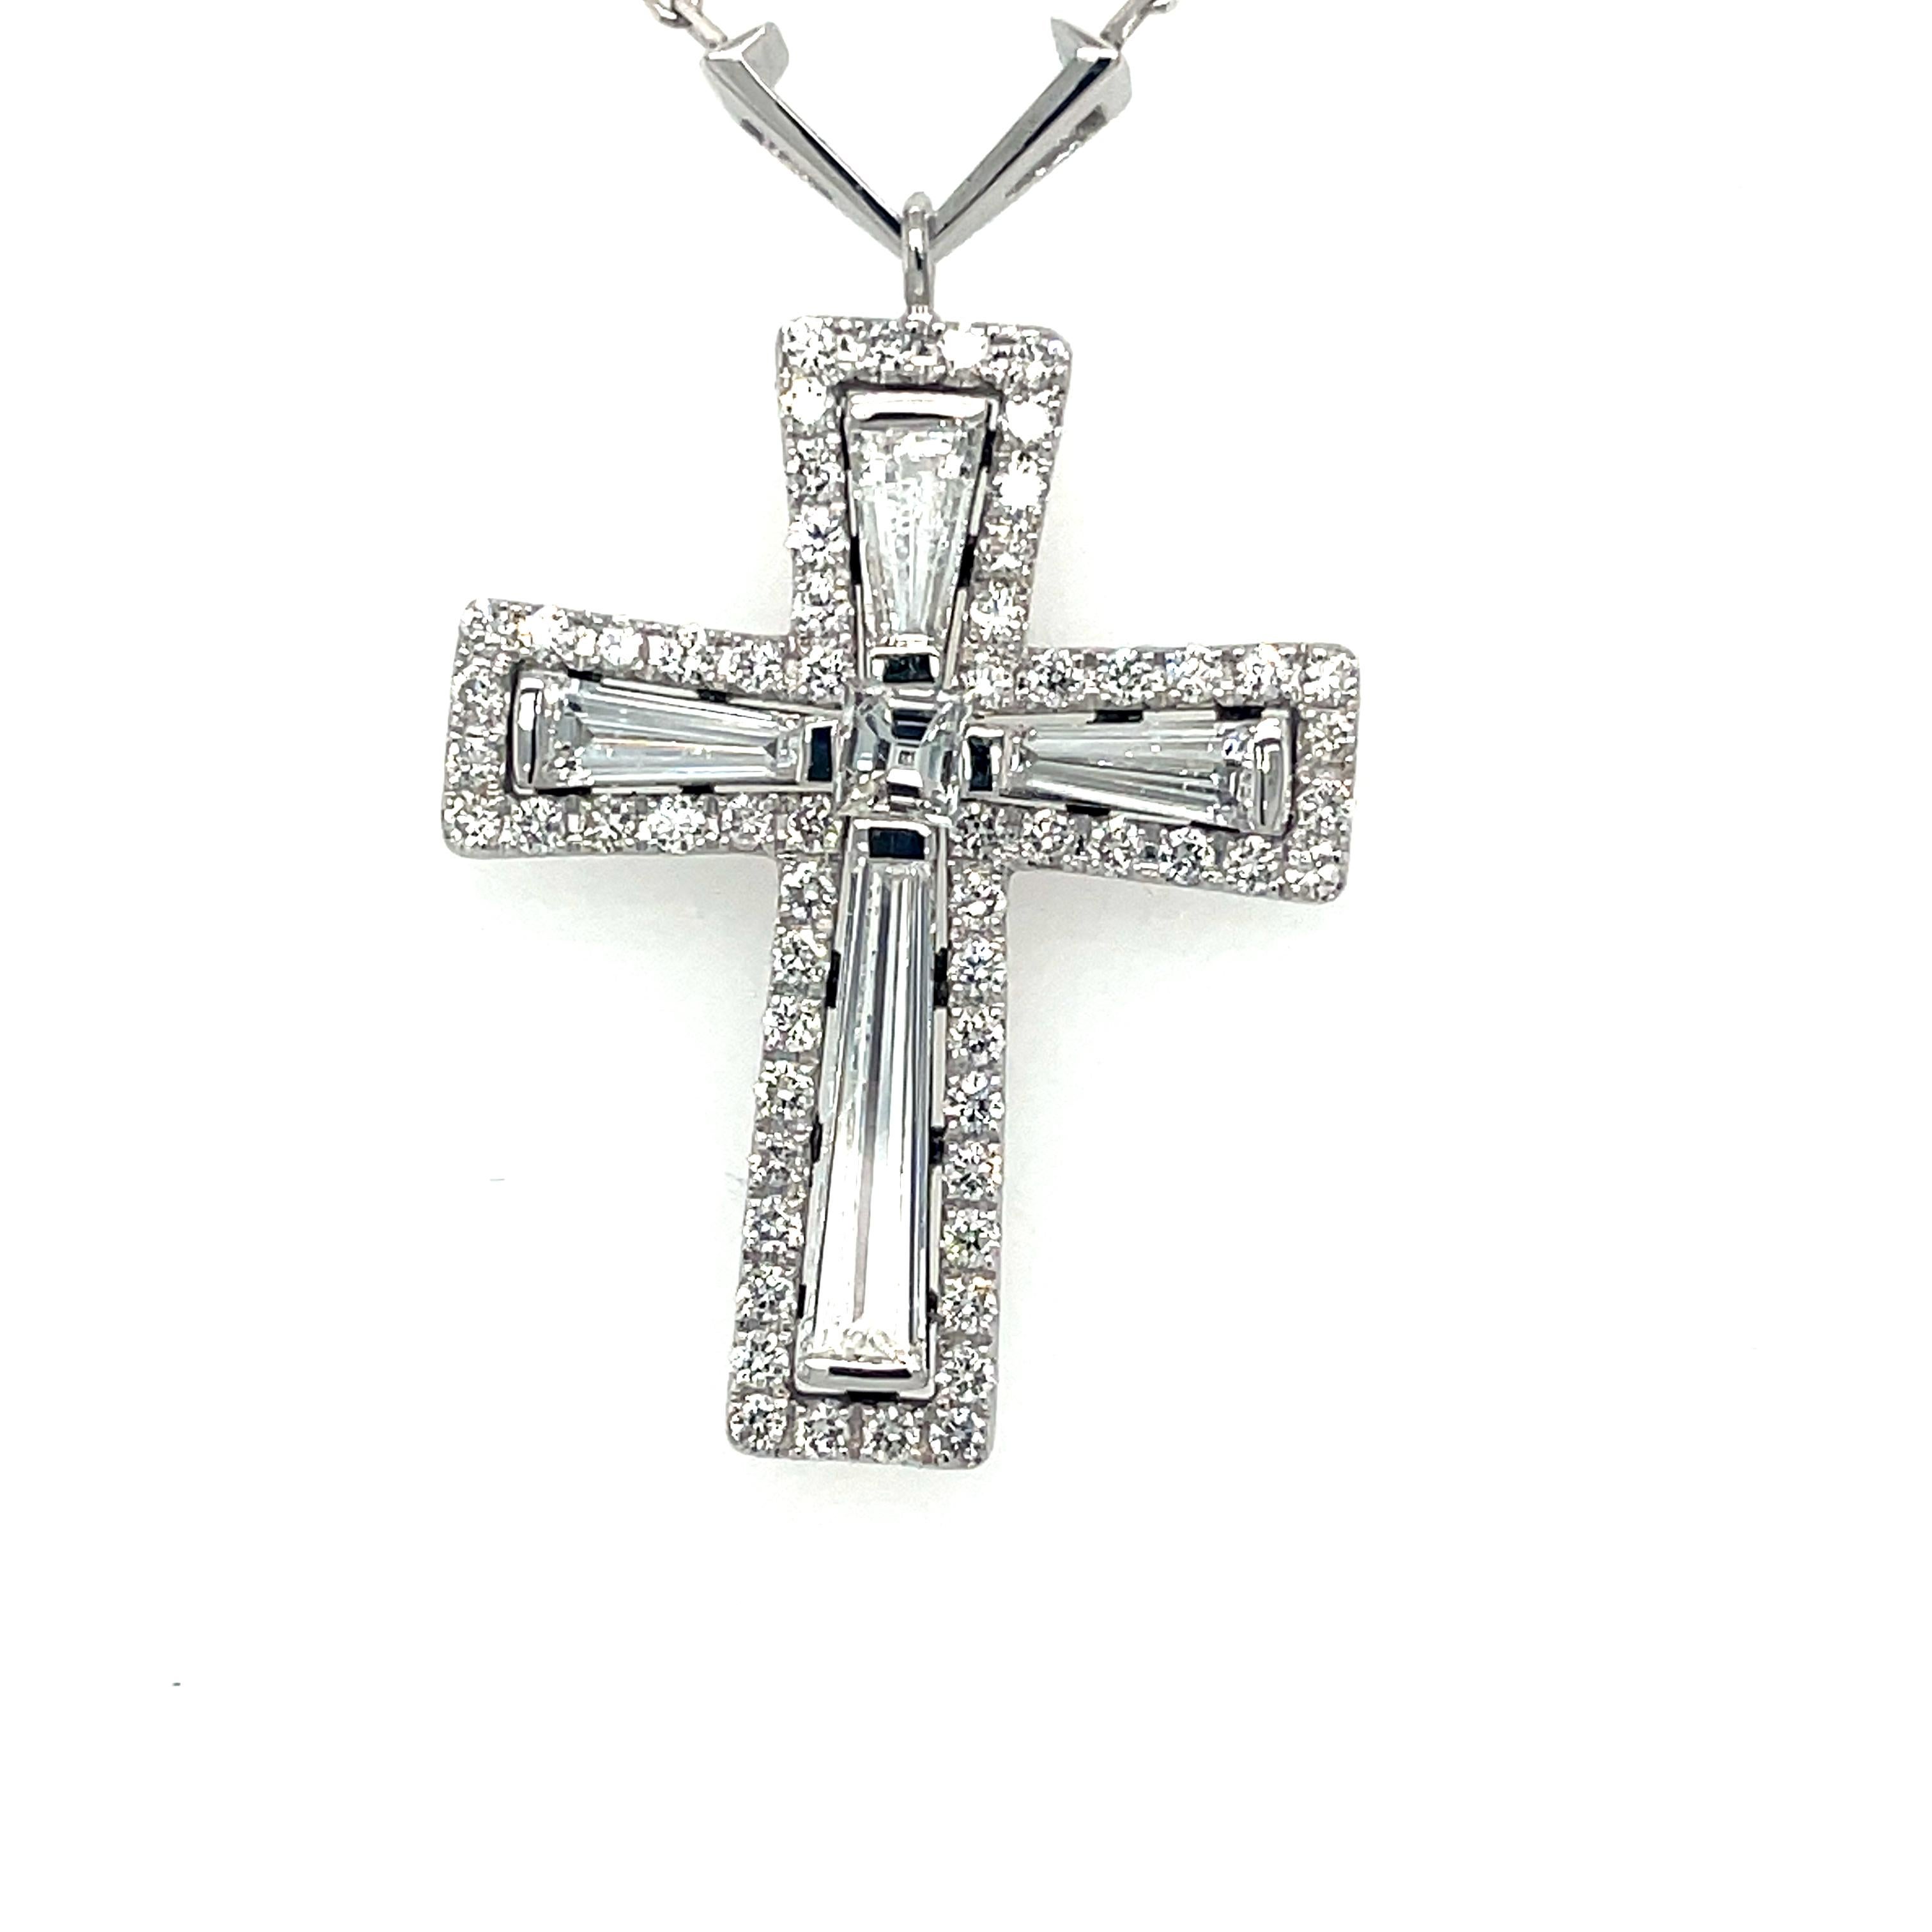 TIMELESS Necklace cross in white gold 18Kt 6.70 gr with Diamond Cross Cut G Color VVS Clarity ink total 0.99 ct and Natural Diamonds G color VS clarity in total 0.69 ct.
Timeless Collection inspired by elegance and its endless style. The